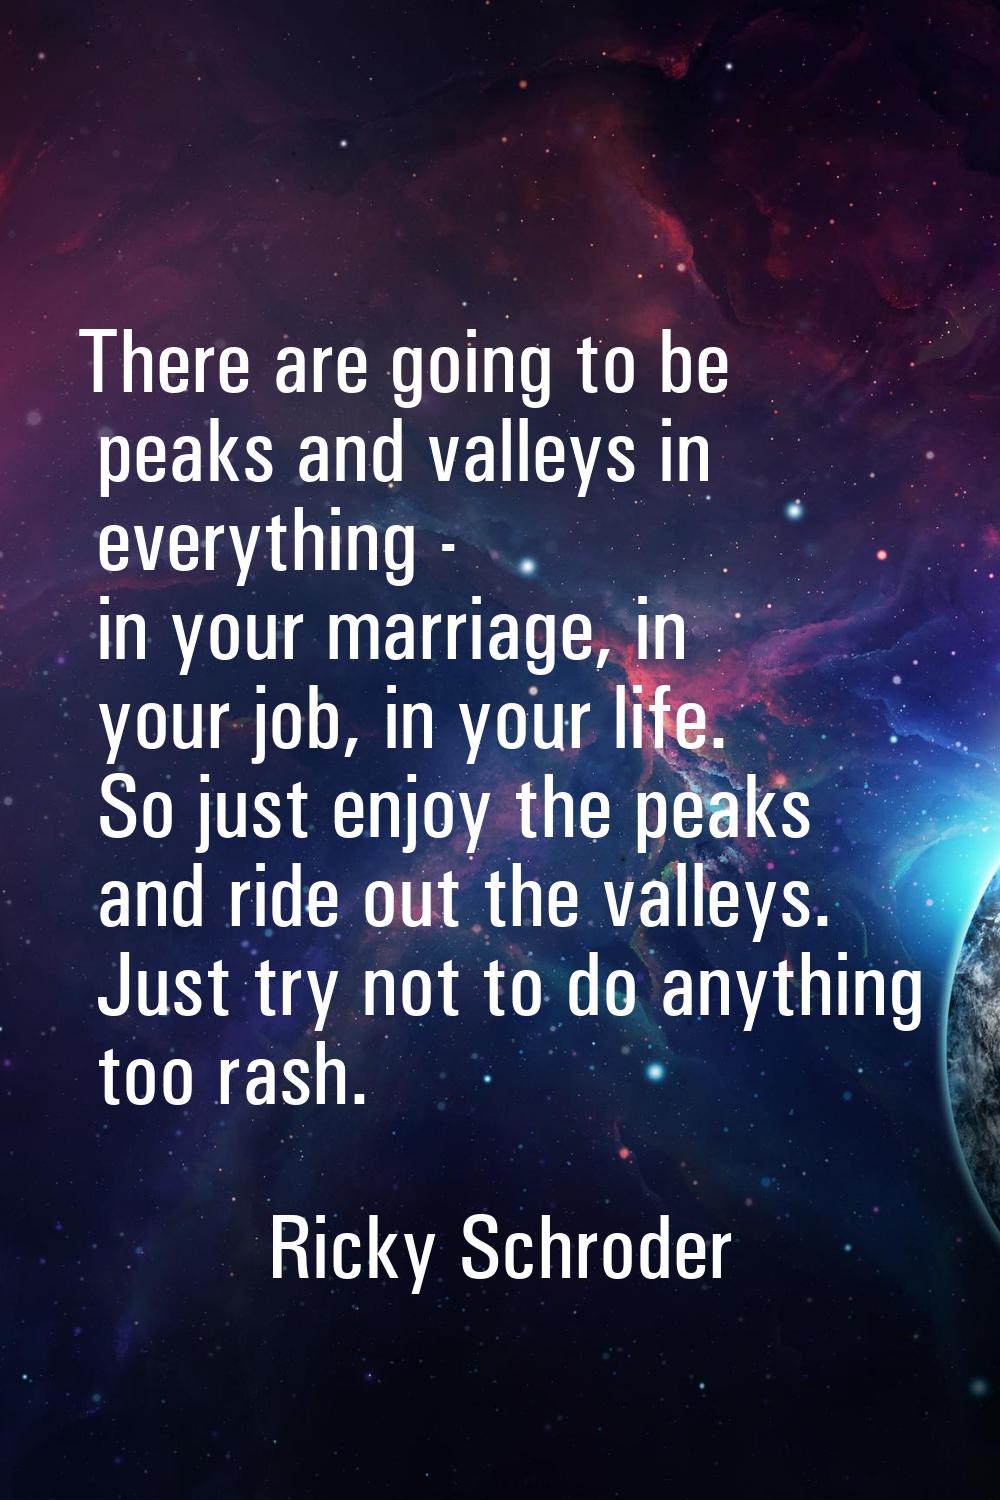 There are going to be peaks and valleys in everything - in your marriage, in your job, in your life